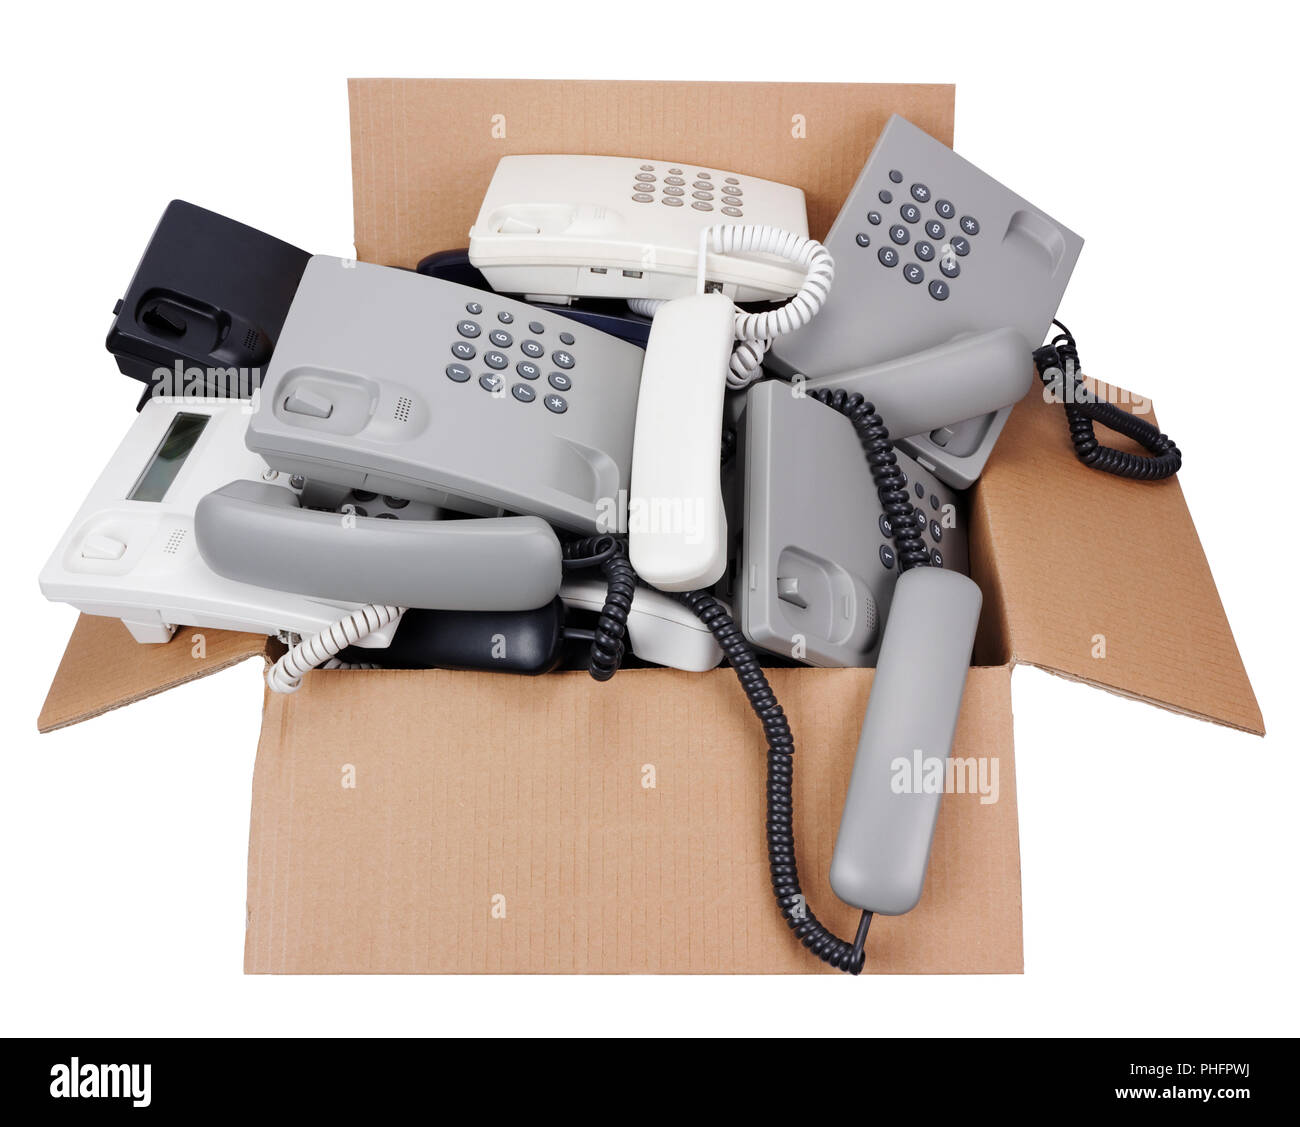 Corded phones consign to the past concept. Stock Photo